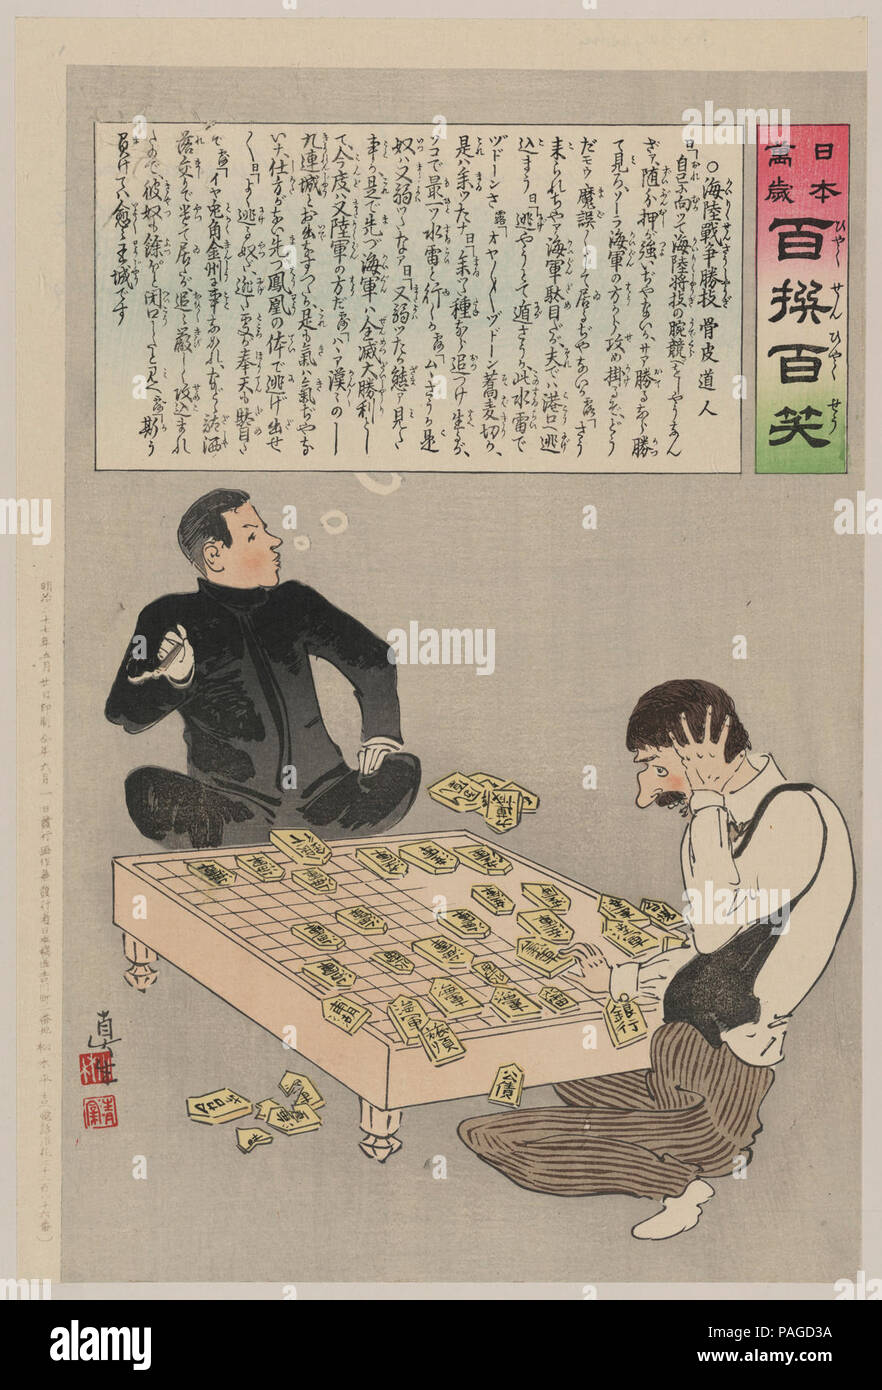 A Russian civilian gets upset during a game of dai shogi, while his Japanese opponent appears confident of victory Stock Photo